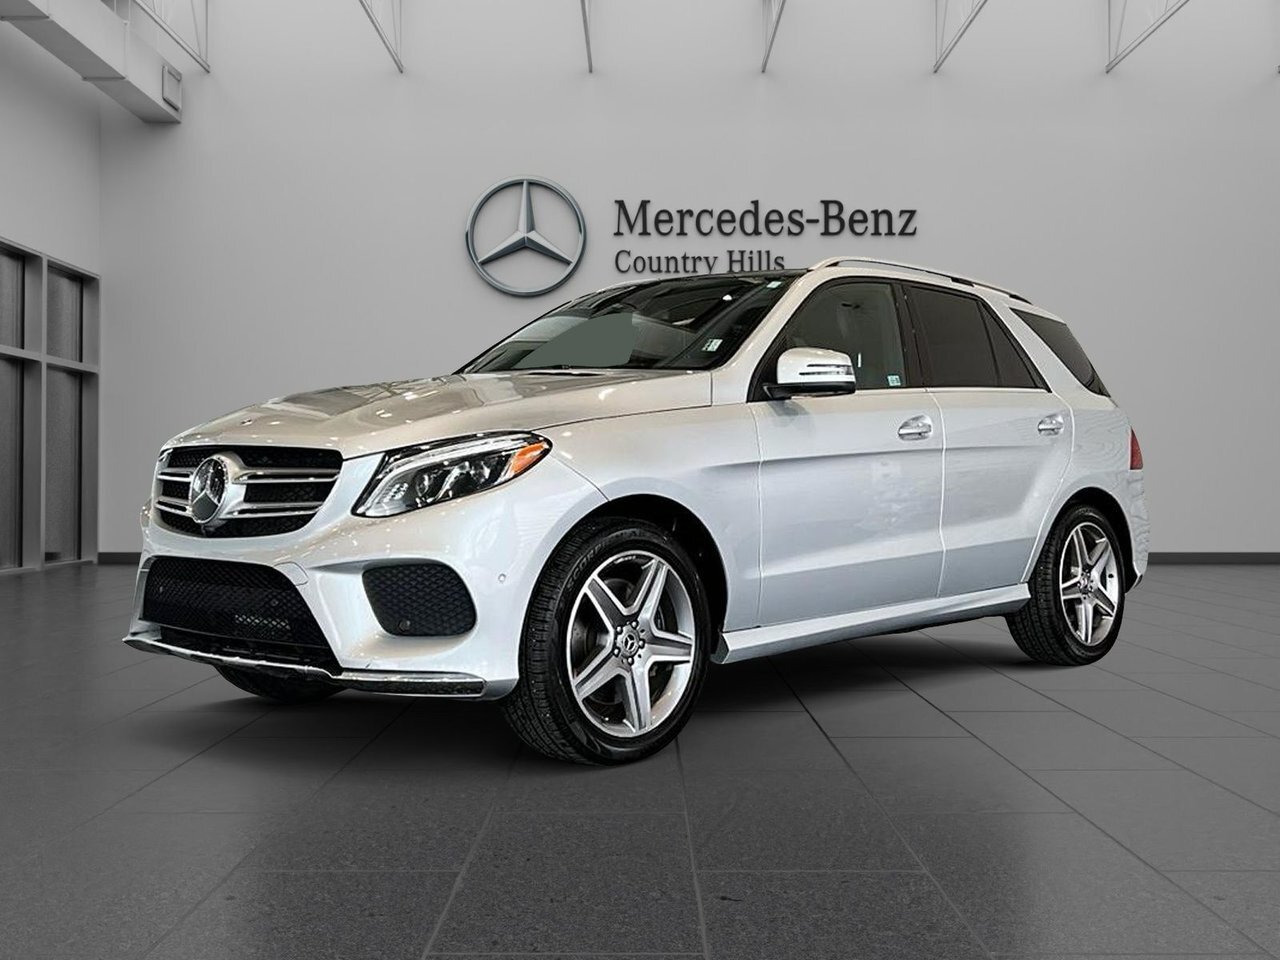 2018 Mercedes-Benz GLE400 4MATIC SUV Only 53,000 km's! Intelligent drive!